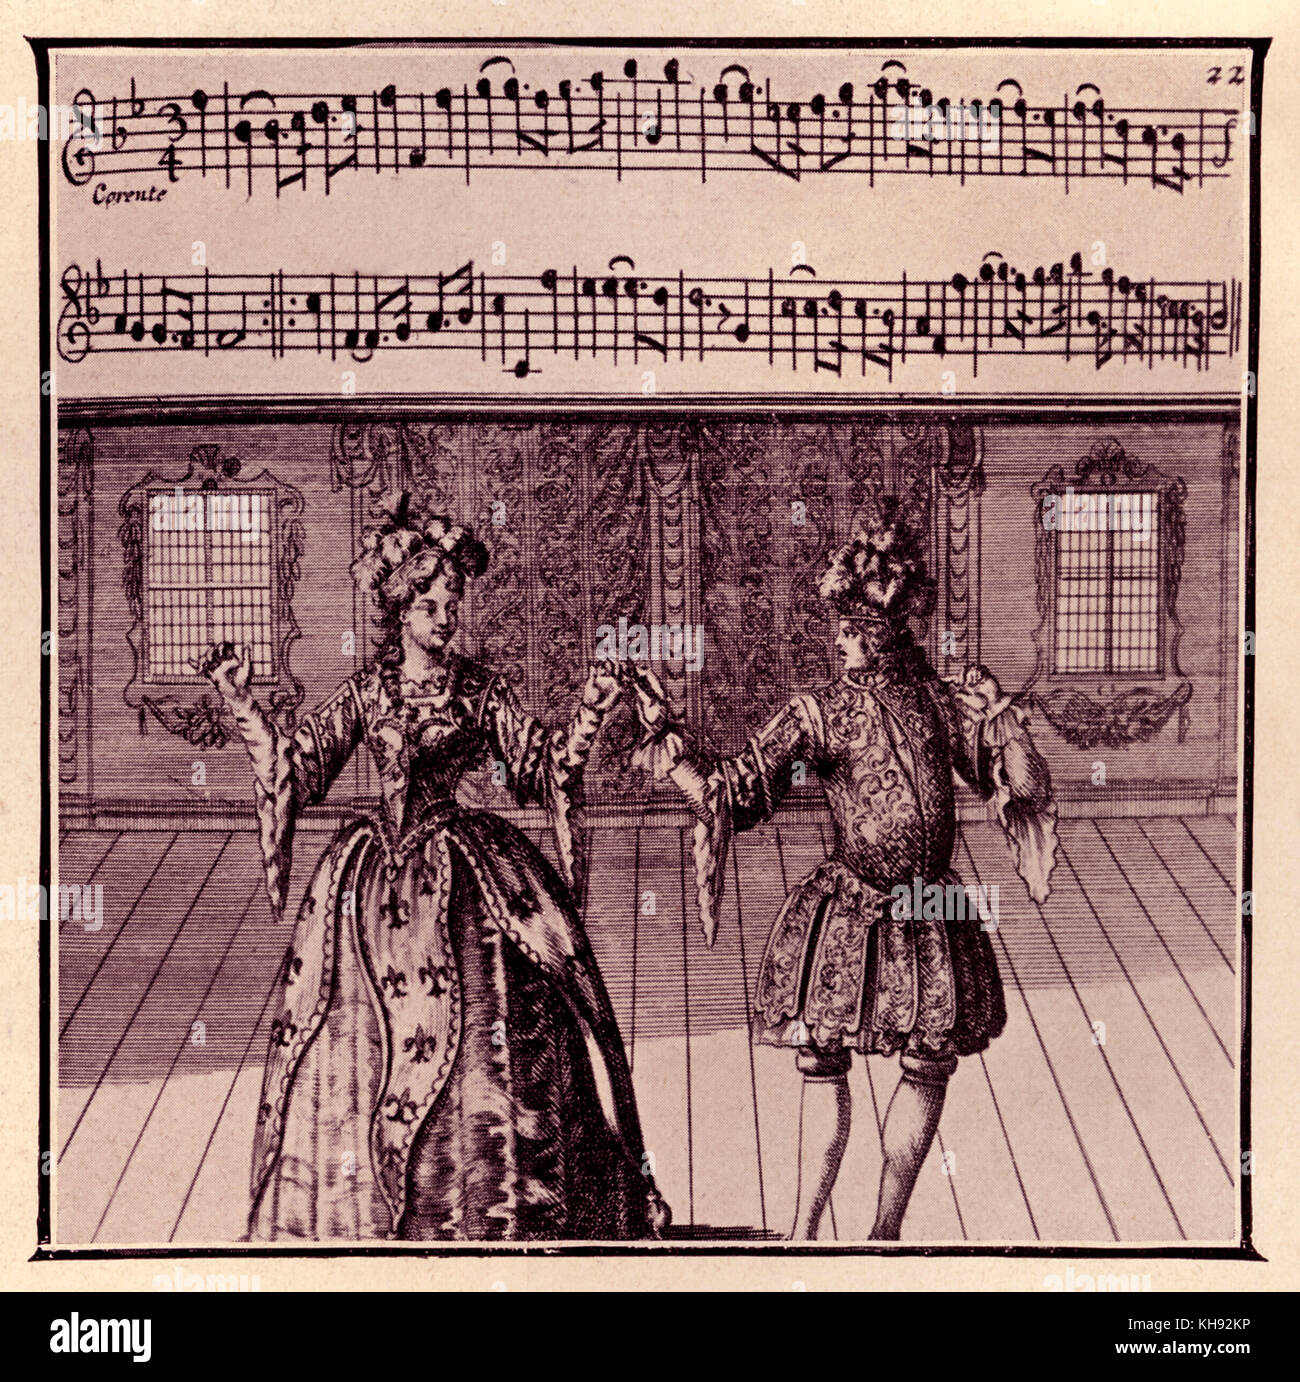 Dance of the Châtelain and Châtelaine - from engraving published in Lambrauzi's Ecole de Danse. Ballet dances of 17th/18th century. (French: 'Danse du Châtelain and  de la Châtelaine). Term of hereditary fiefdom. Stock Photo